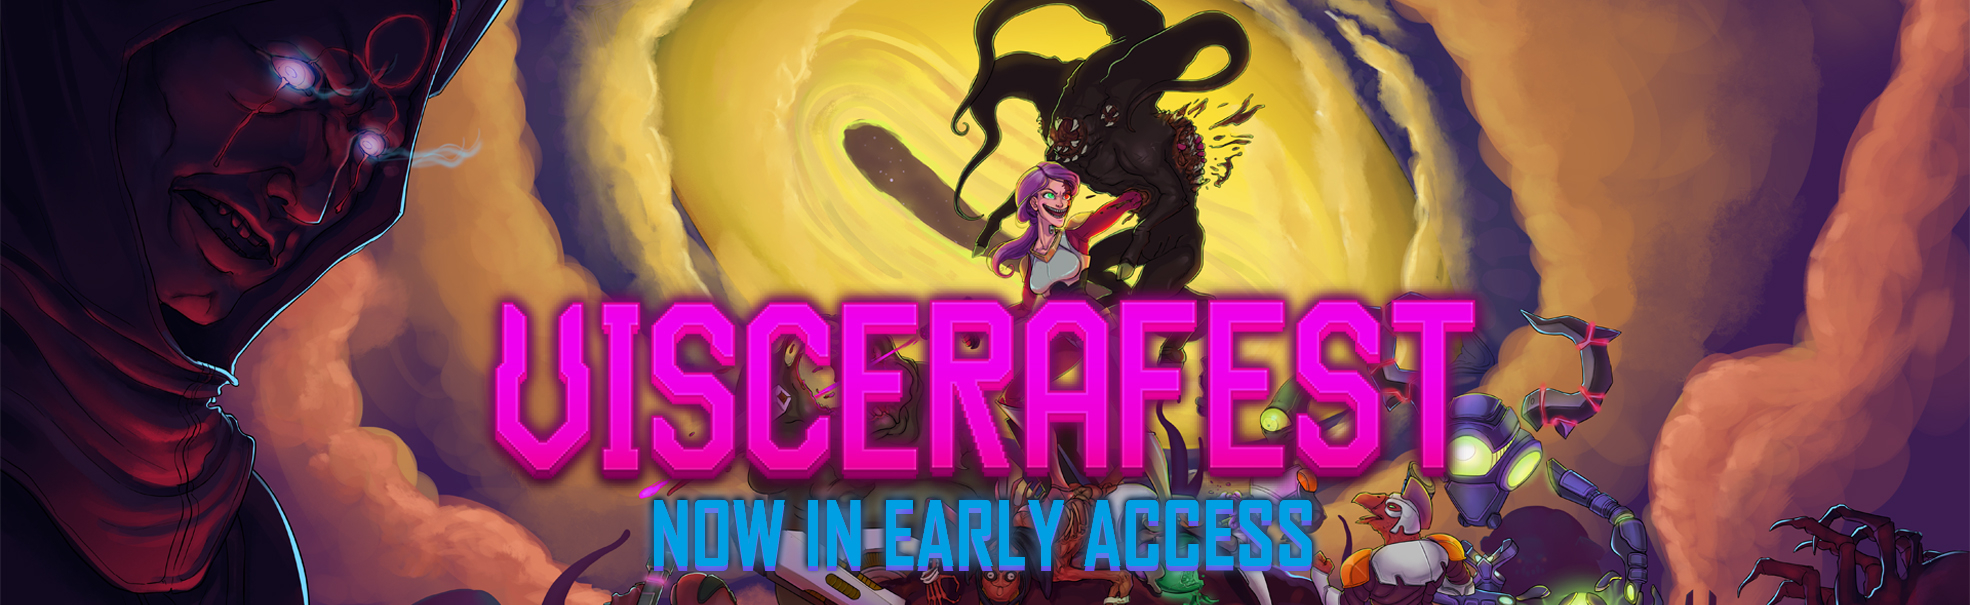 Viscerafest Early Access now available!